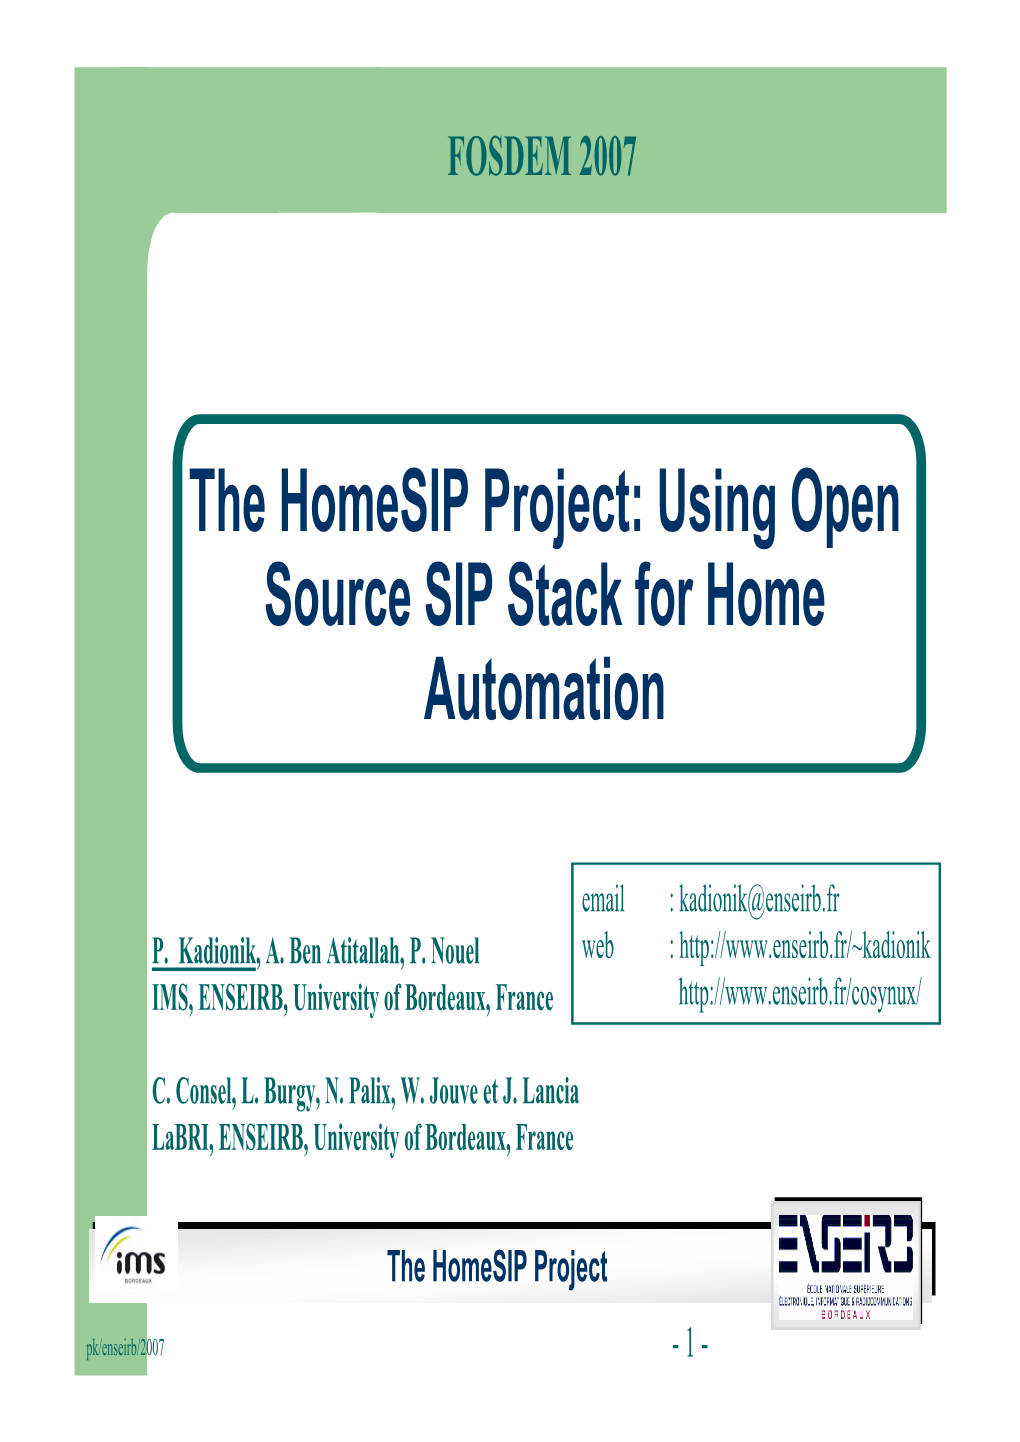 The Homesip Project: Using Open Source SIP Stack for Home Automation